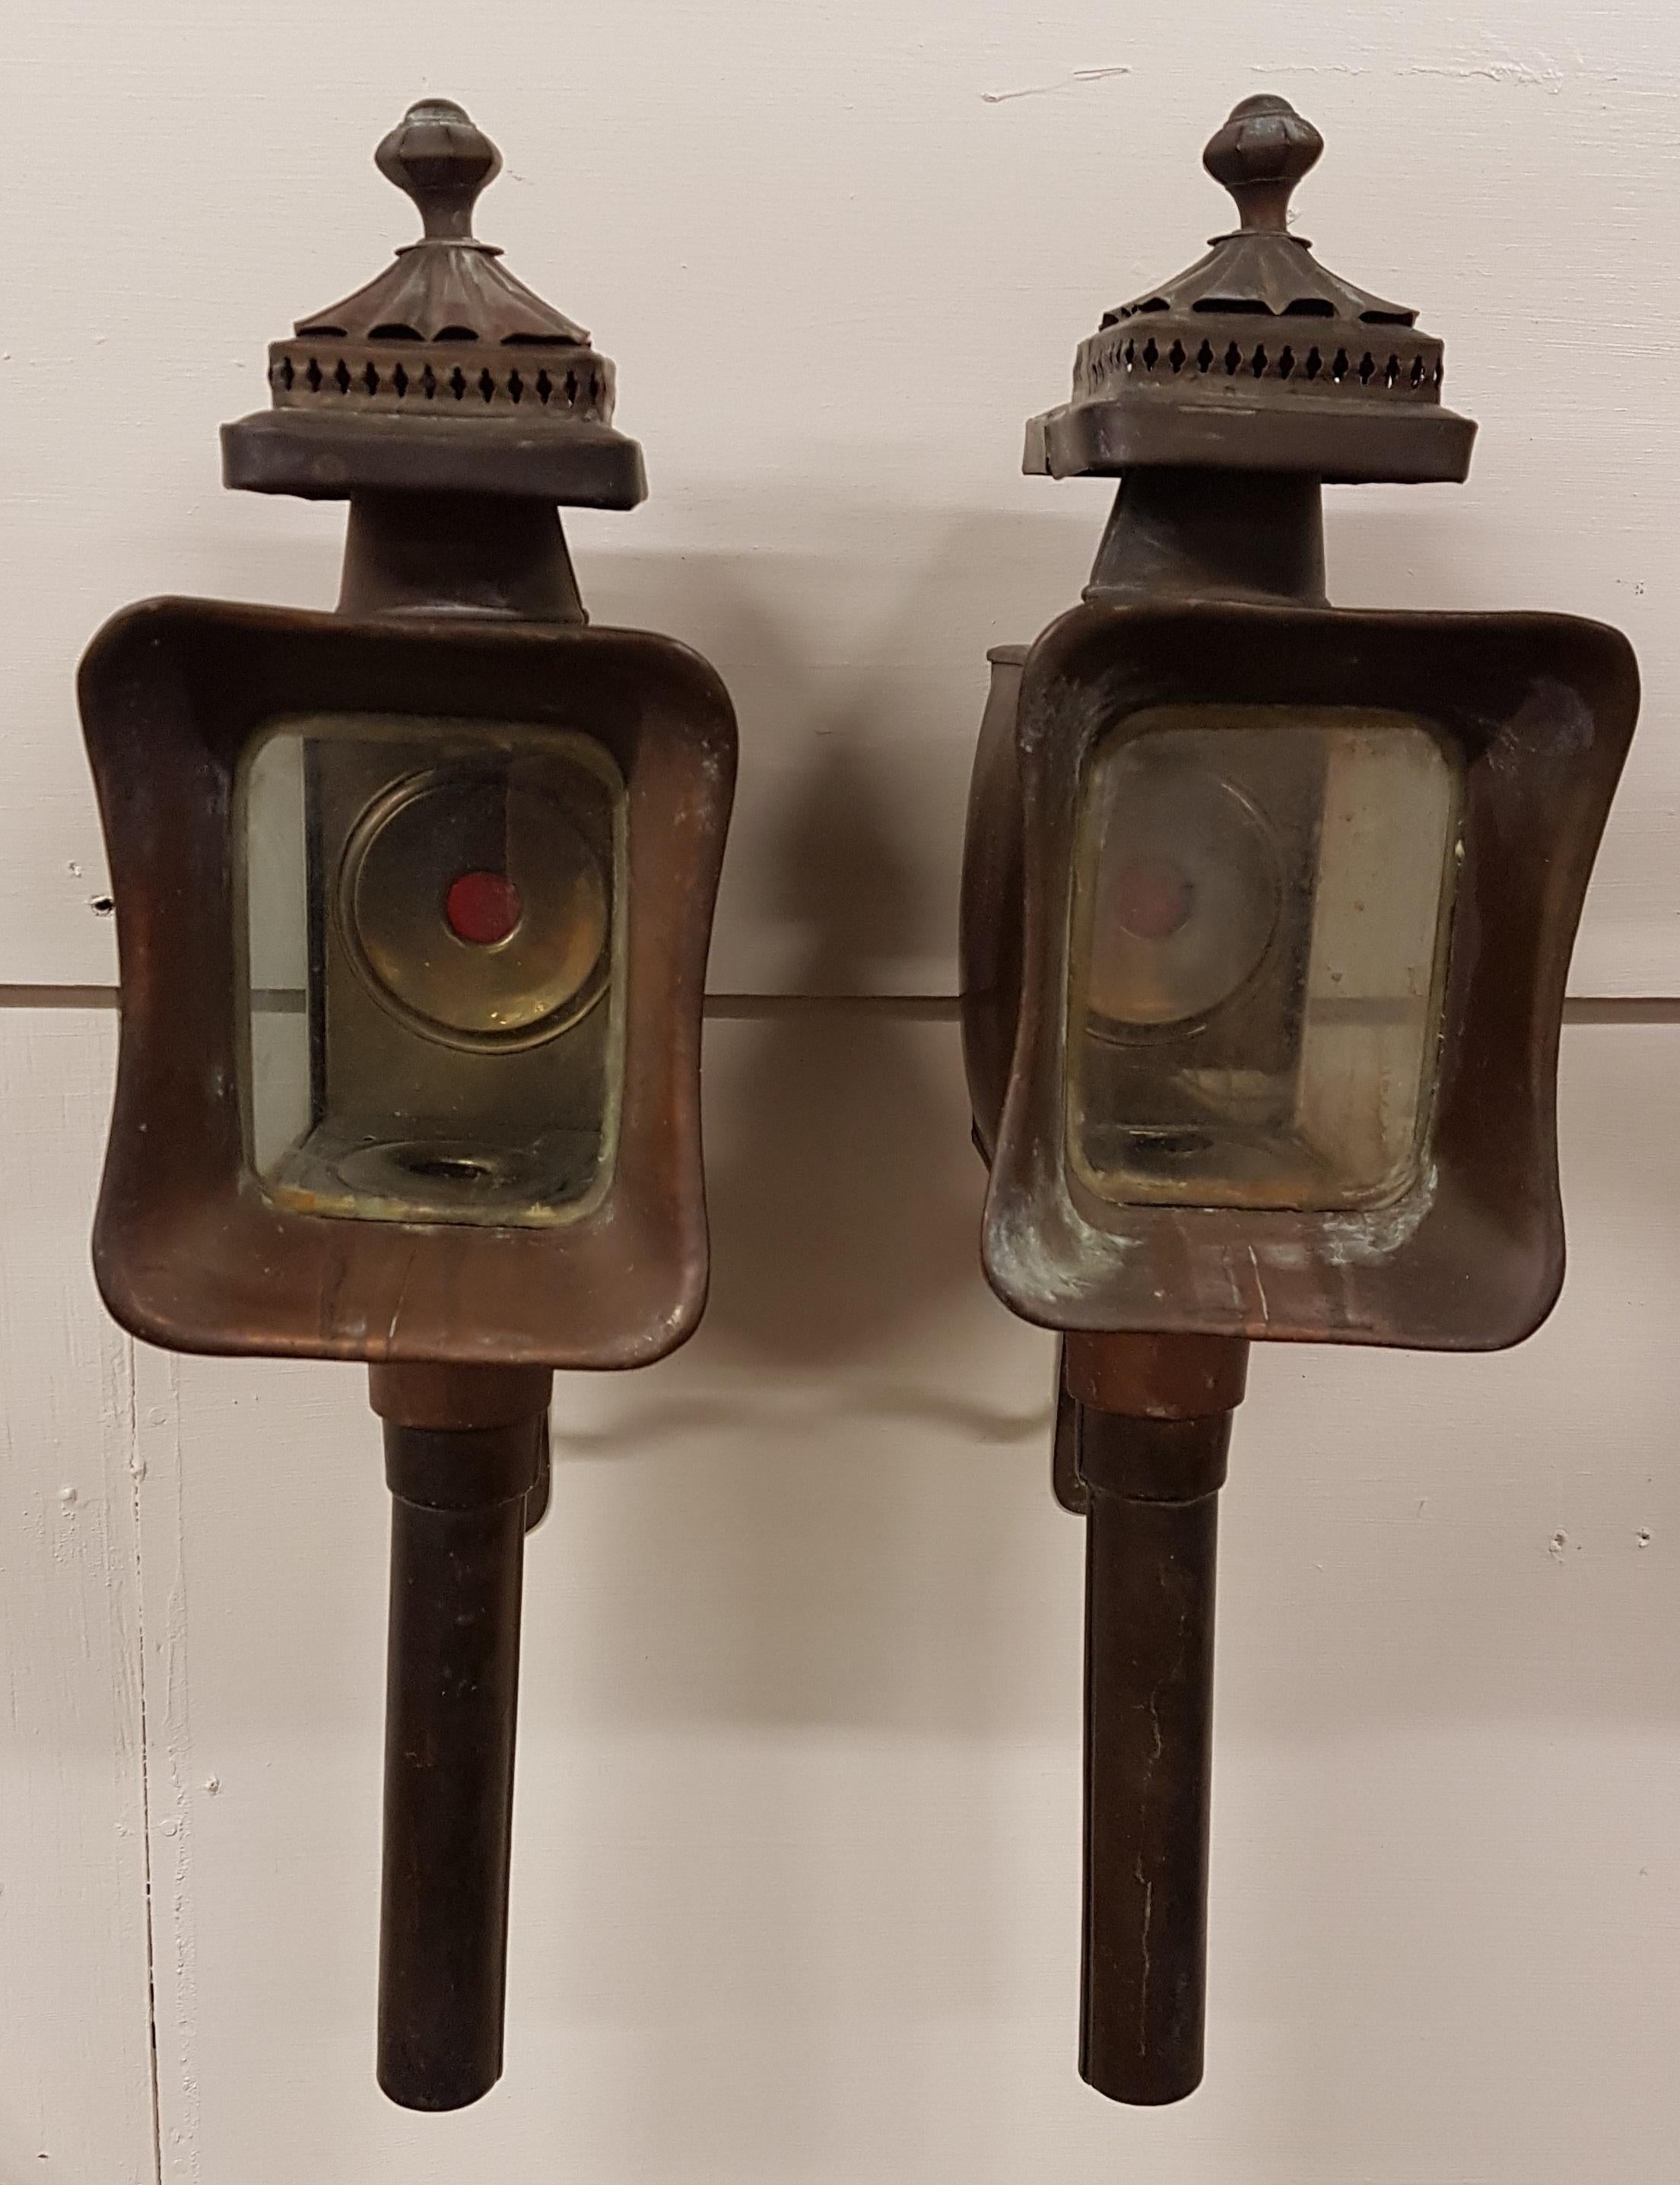 Pair of Brass and Copper Carriage Lanterns im Zustand „Relativ gut“ in Bodicote, Oxfordshire